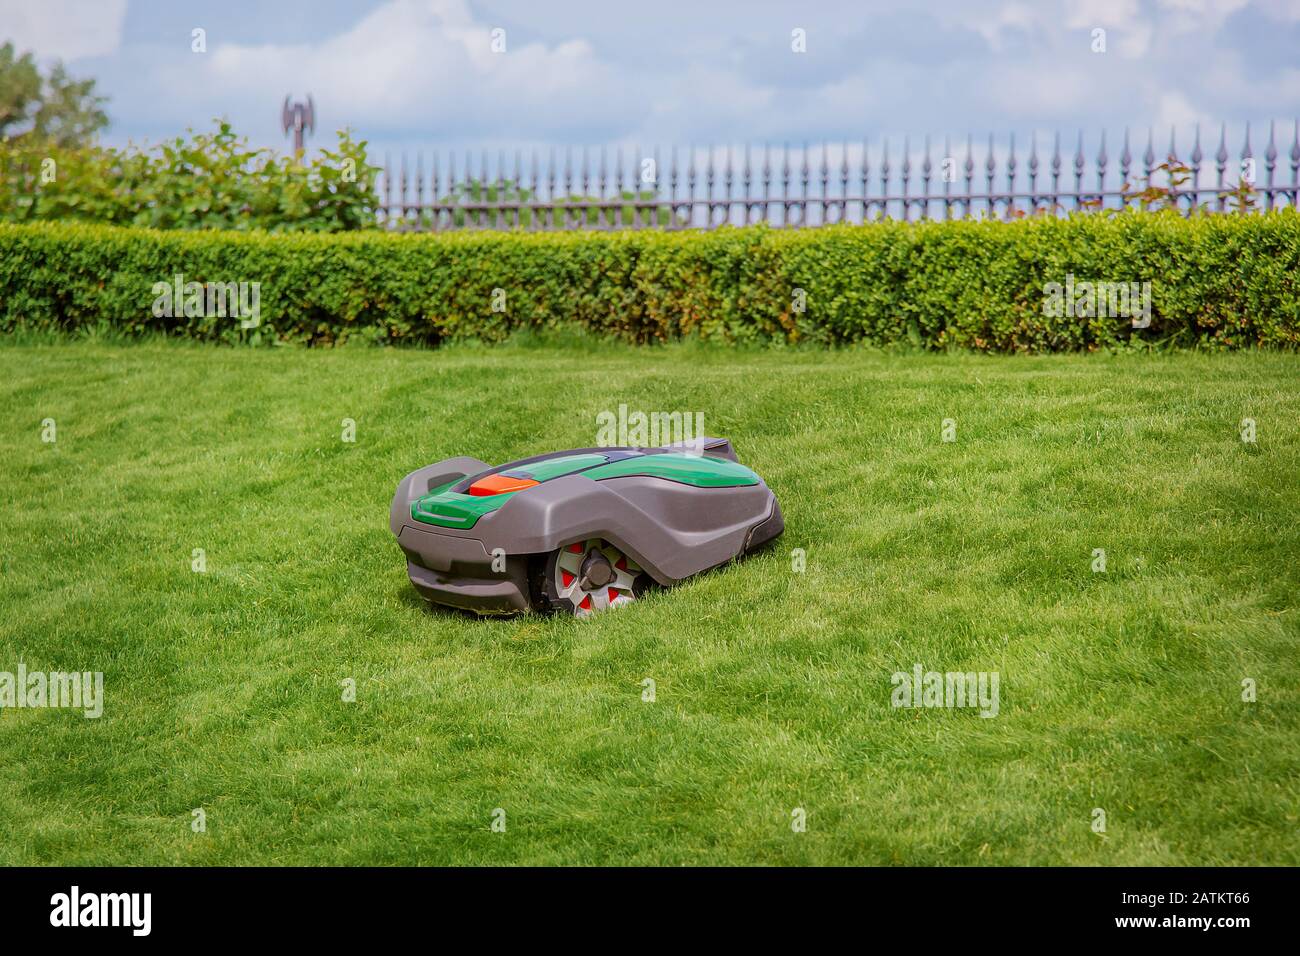 Robotic lawn mower on grass, side view. Garden modern remote technology. Stock Photo